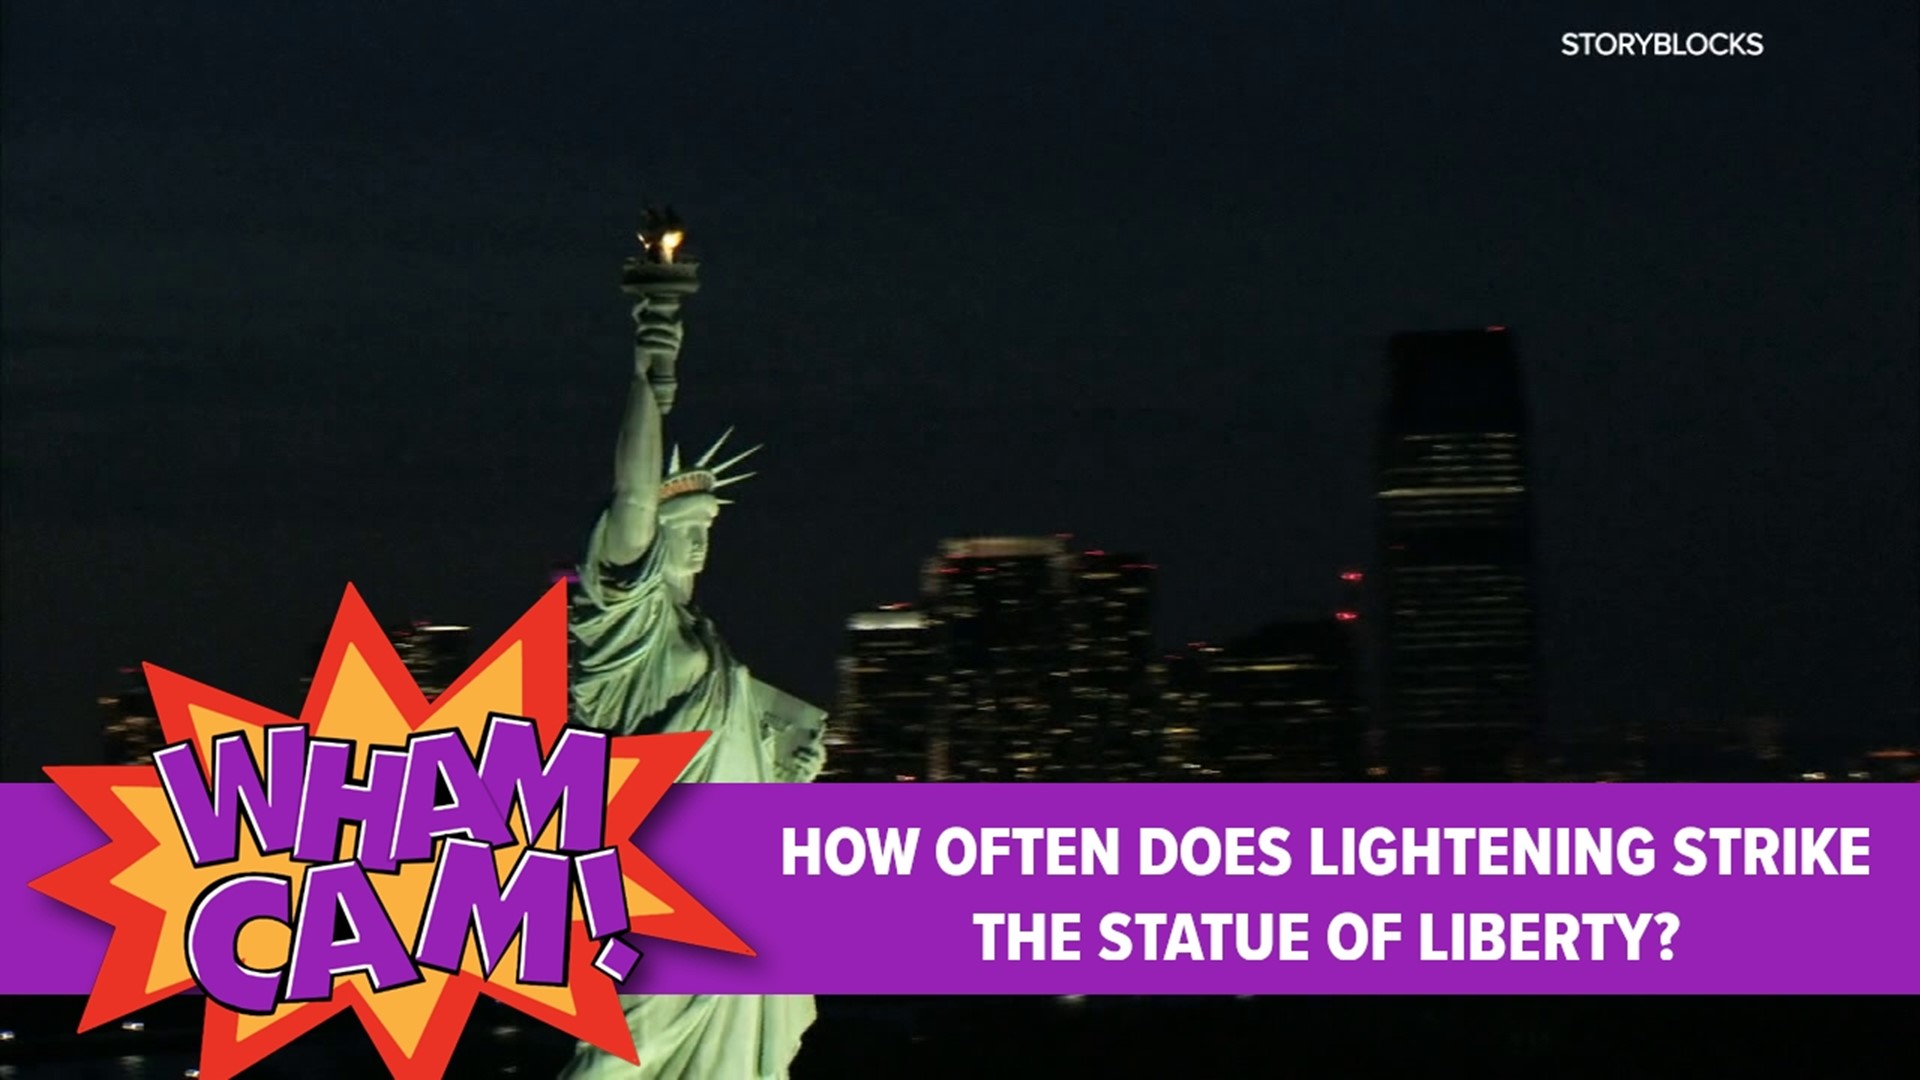 It's thunderstorm season. So, how often does the Statue of Liberty get struck by lightning? Joe was in Dunmore to see if anyone there knew the answer.